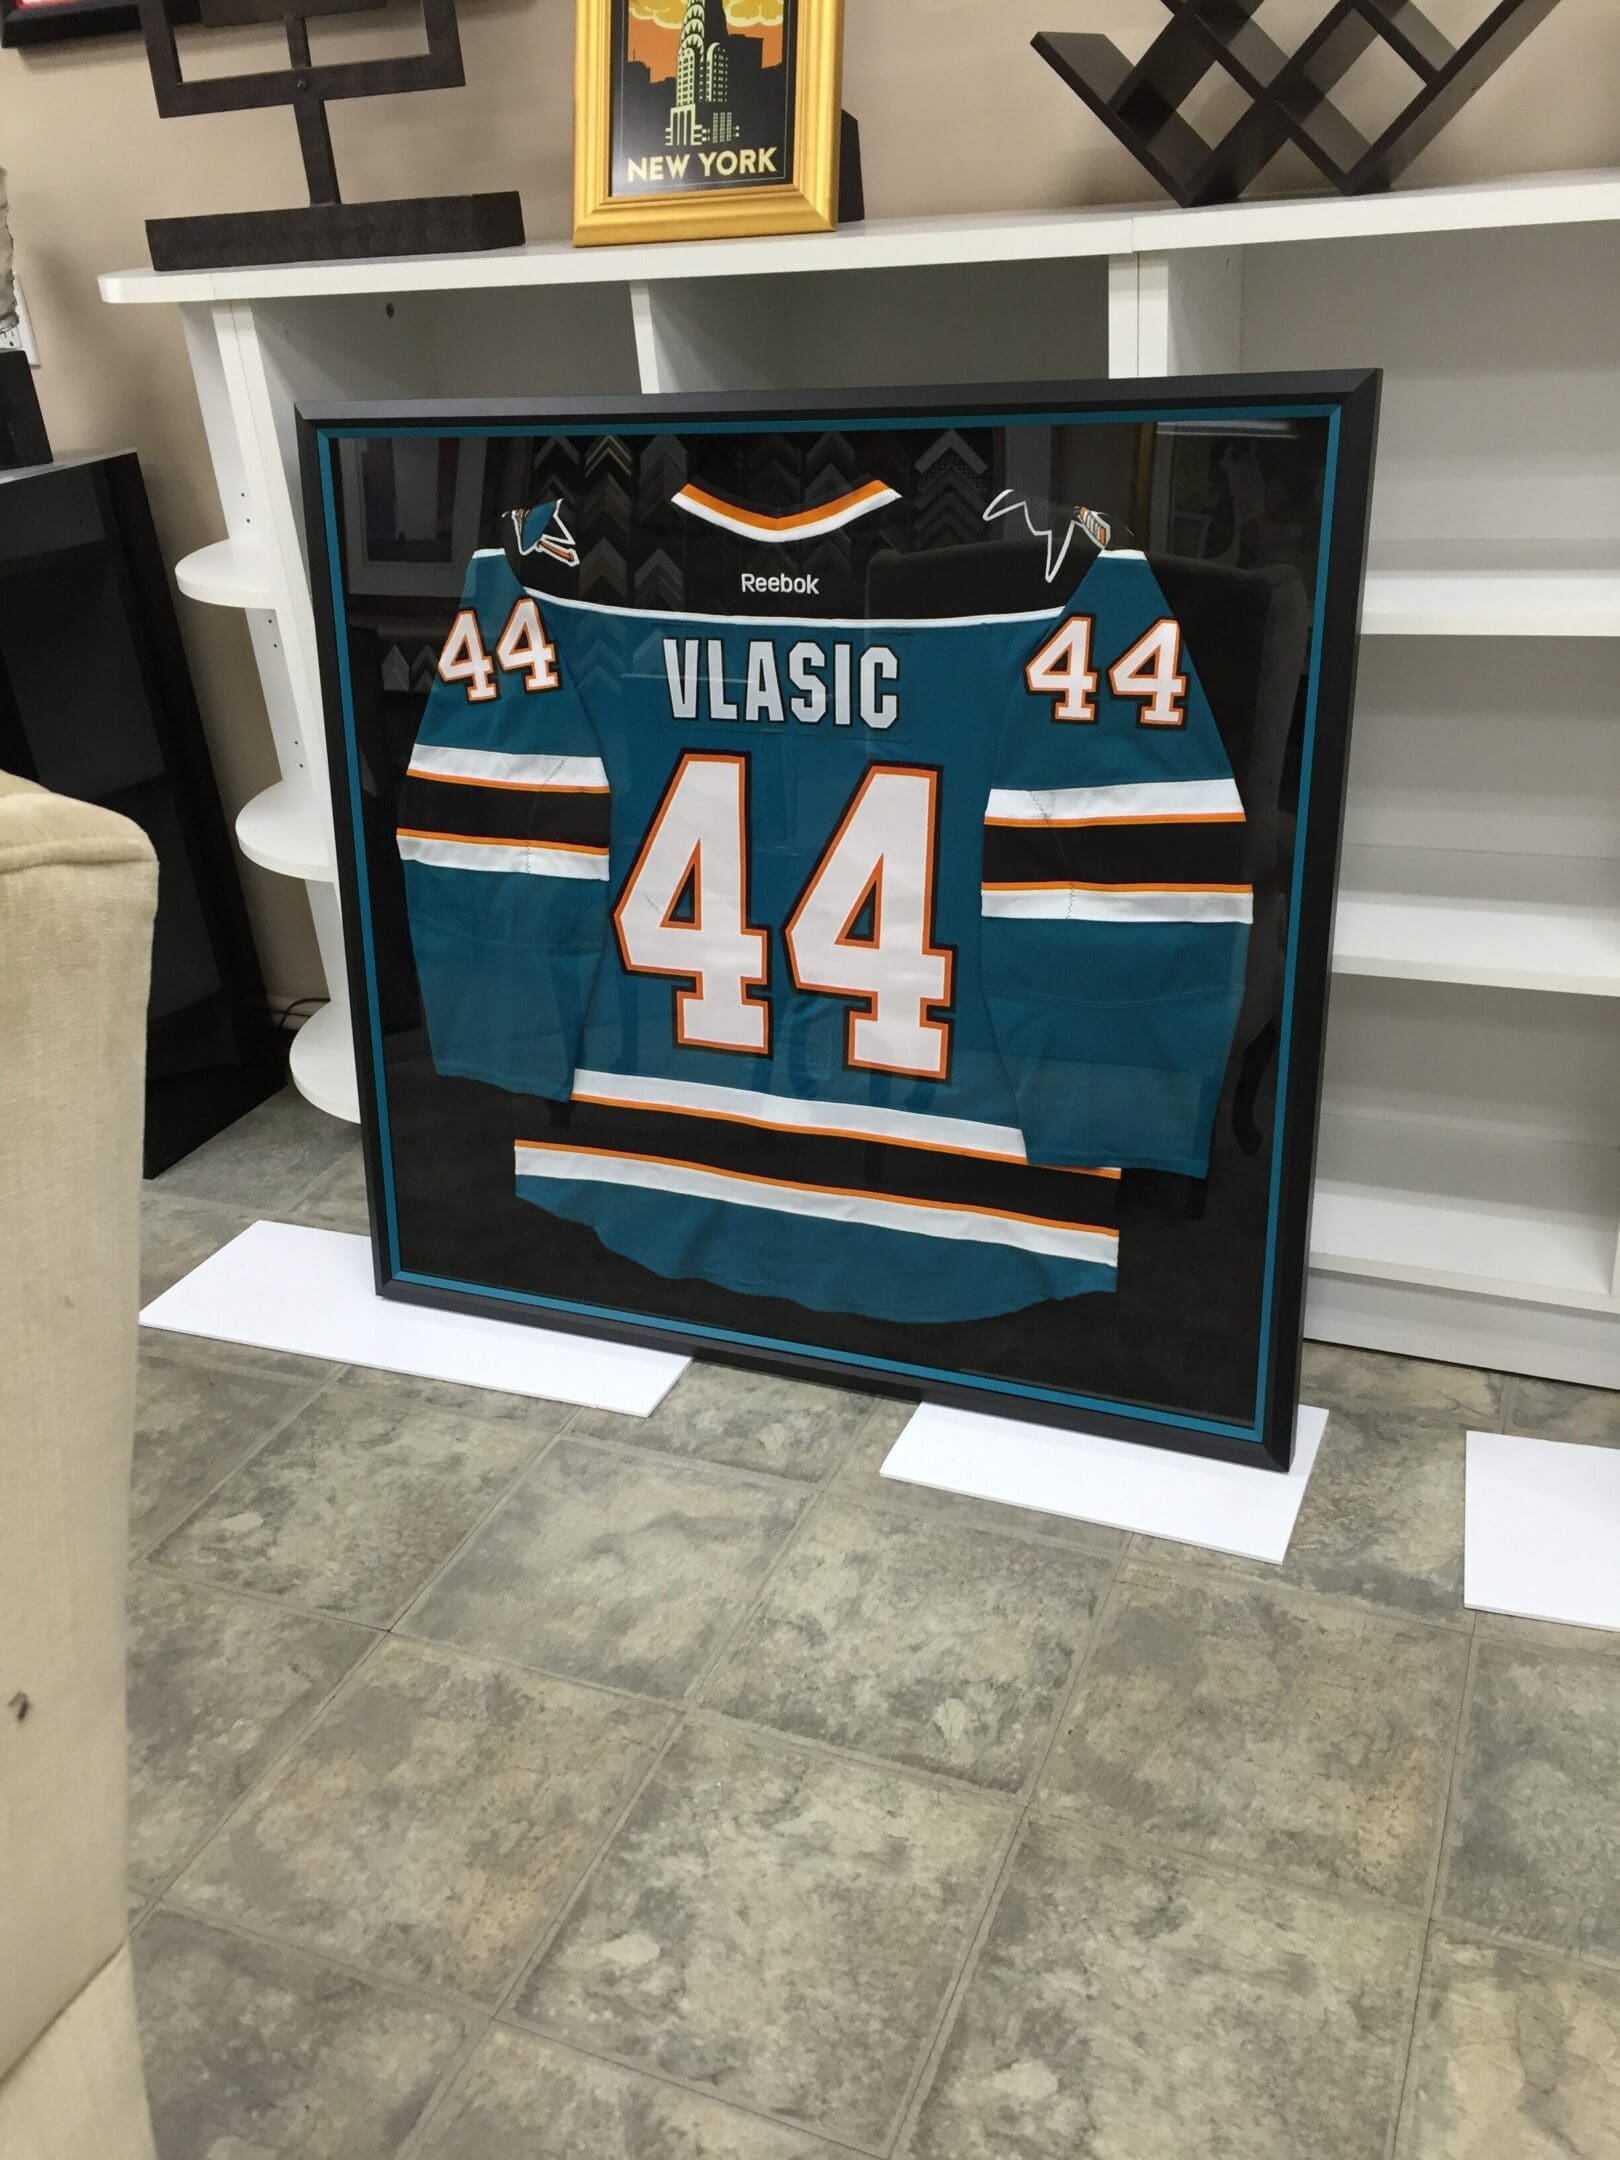 A hockey jersey is displayed in a frame.